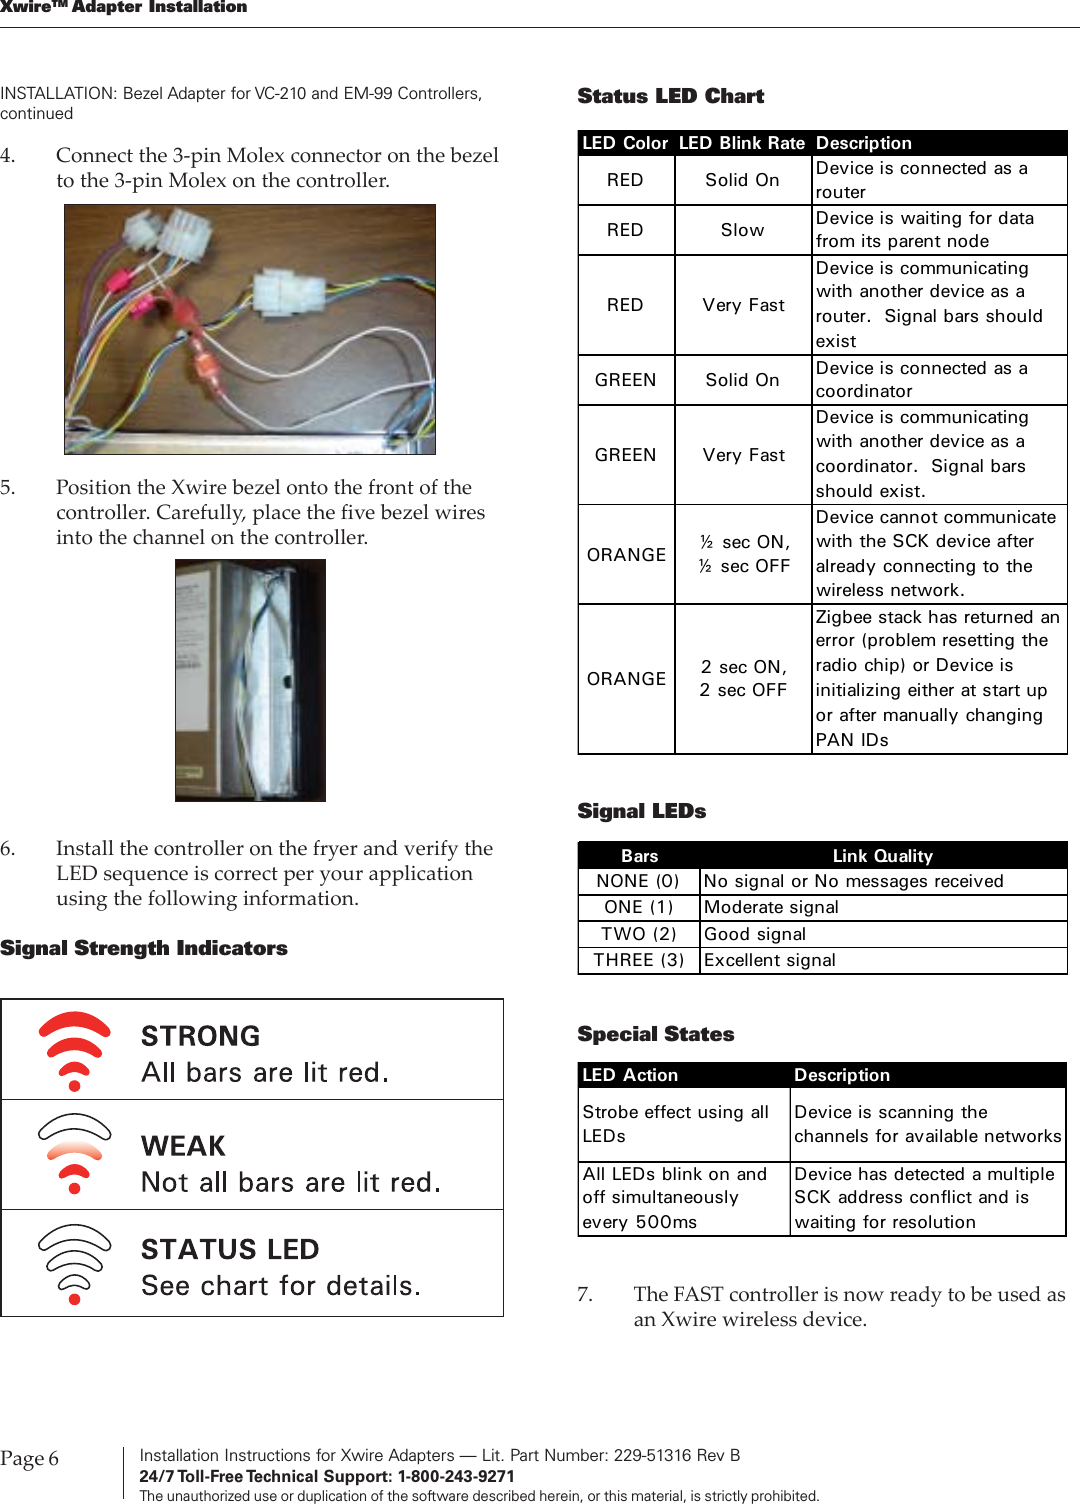 Installation Instructions for Xwire Adapters — Lit. Part Number: 229-51316 Rev B24/7 Toll-Free Technical  Support:  1-800-243-9271The unauthorized use or duplication of the software described herein, or this material, is strictly prohibited.Page 6XwireTM Adapter InstallationINSTALLATION: Bezel Adapter for VC-210 and EM-99 Controllers,continuedSignal LEDsSpecial StatesBars Link QualityNONE (0) No signal or No messages receivedONE (1) Moderate signalTWO (2) Good signalTHREE (3) Excellent signalLED Action DescriptionStrobe effect using all LEDsDevice is scanning the channels for available networksAll LEDs blink on and off simultaneously every 500msDevice has detected a multiple SCK address conflict and is waiting for resolution7. The FAST controller is now ready to be used asan Xwire wireless device.4. Connect the 3-pin Molex connector on the bezelto the 3-pin Molex on the controller.5. Position the Xwire bezel onto the front of thecontroller. Carefully, place the five bezel wiresinto the channel on the controller.6. Install the controller on the fryer and verify theLED sequence is correct per your applicationusing the following information.Signal Strength IndicatorsStatus LED ChartLED Color LED Blink Rate DescriptionRED Solid On Device is connected as a routerRED Slow  Device is waiting for data from its parent nodeRED Very FastDevice is communicating with another device as a router. Signal bars should existGREEN Solid On Device is connected as a coordinatorGREEN Very FastDevice is communicating with another device as a coordinator. Signal bars should exist.ORANGE ½ sec ON, ½ sec OFFDevice cannot communicate with the SCK device after already connecting to the wireless network.ORANGE 2 sec ON, 2 sec OFFZigbee stack has returned an error (problem resetting the radio chip) or Device is initializing either at start up or after manually changing PAN IDs